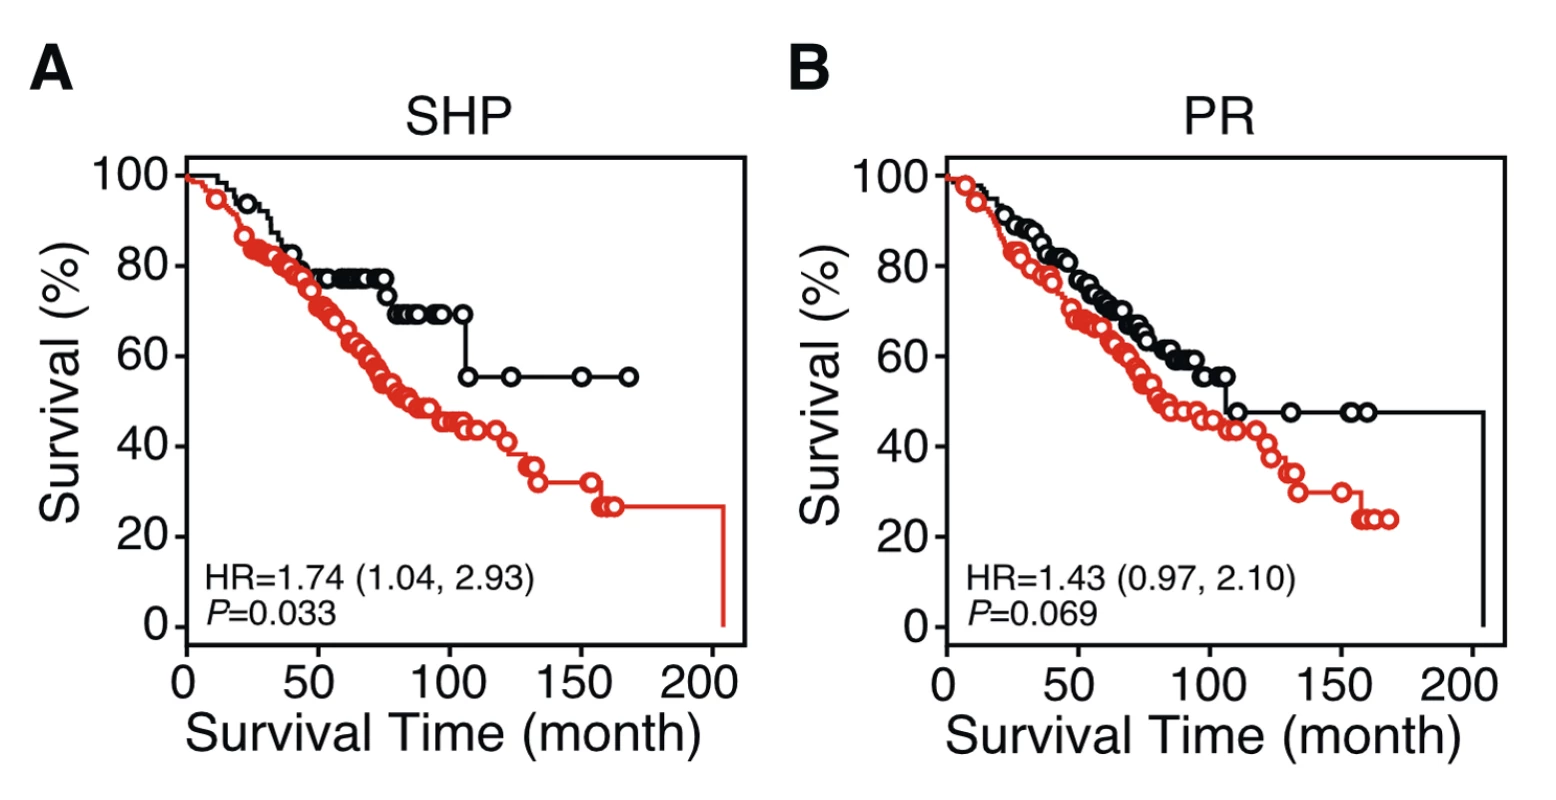 Kaplan-Meier survival plots showing single NR gene predictors in patients with stage I lung cancer.